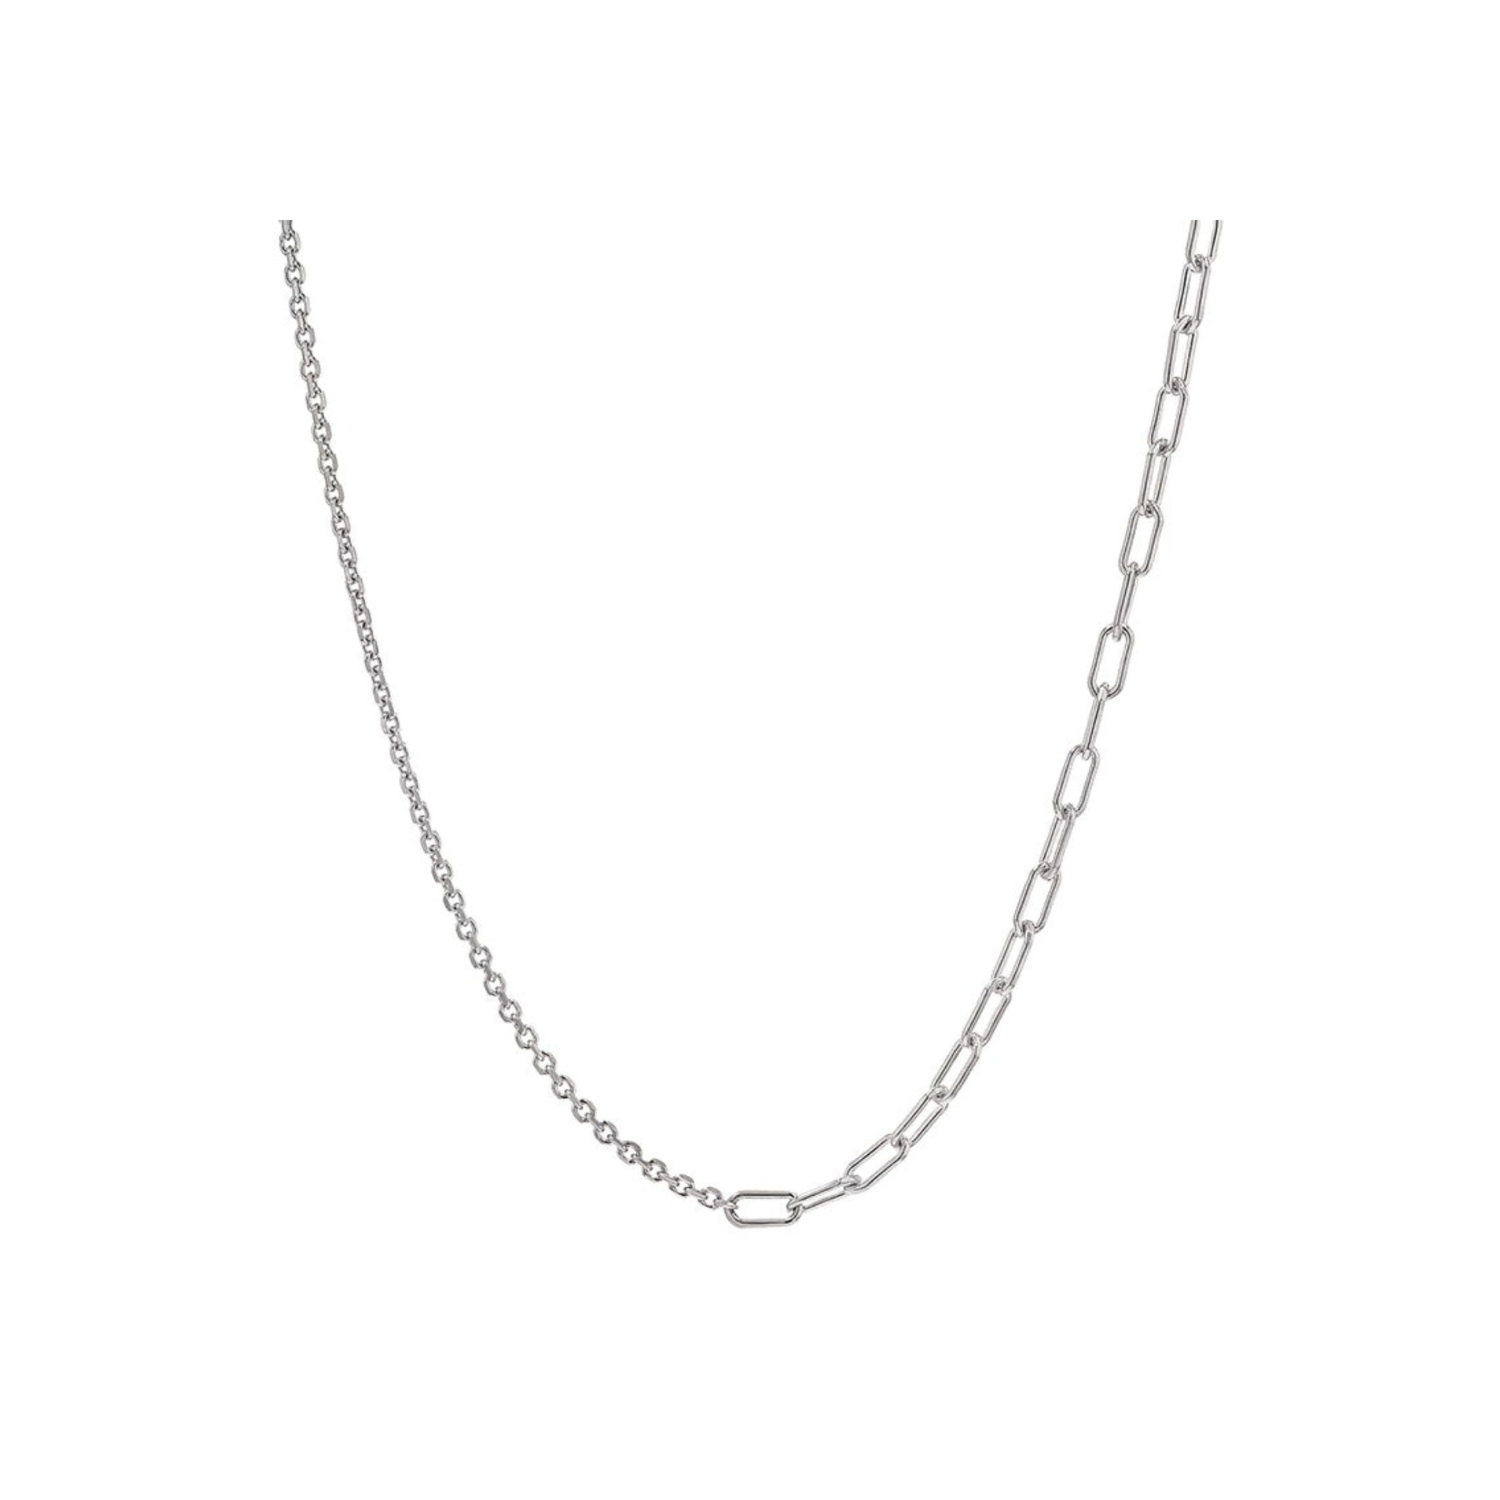 necklace, silver, chain, thin necklace, gift